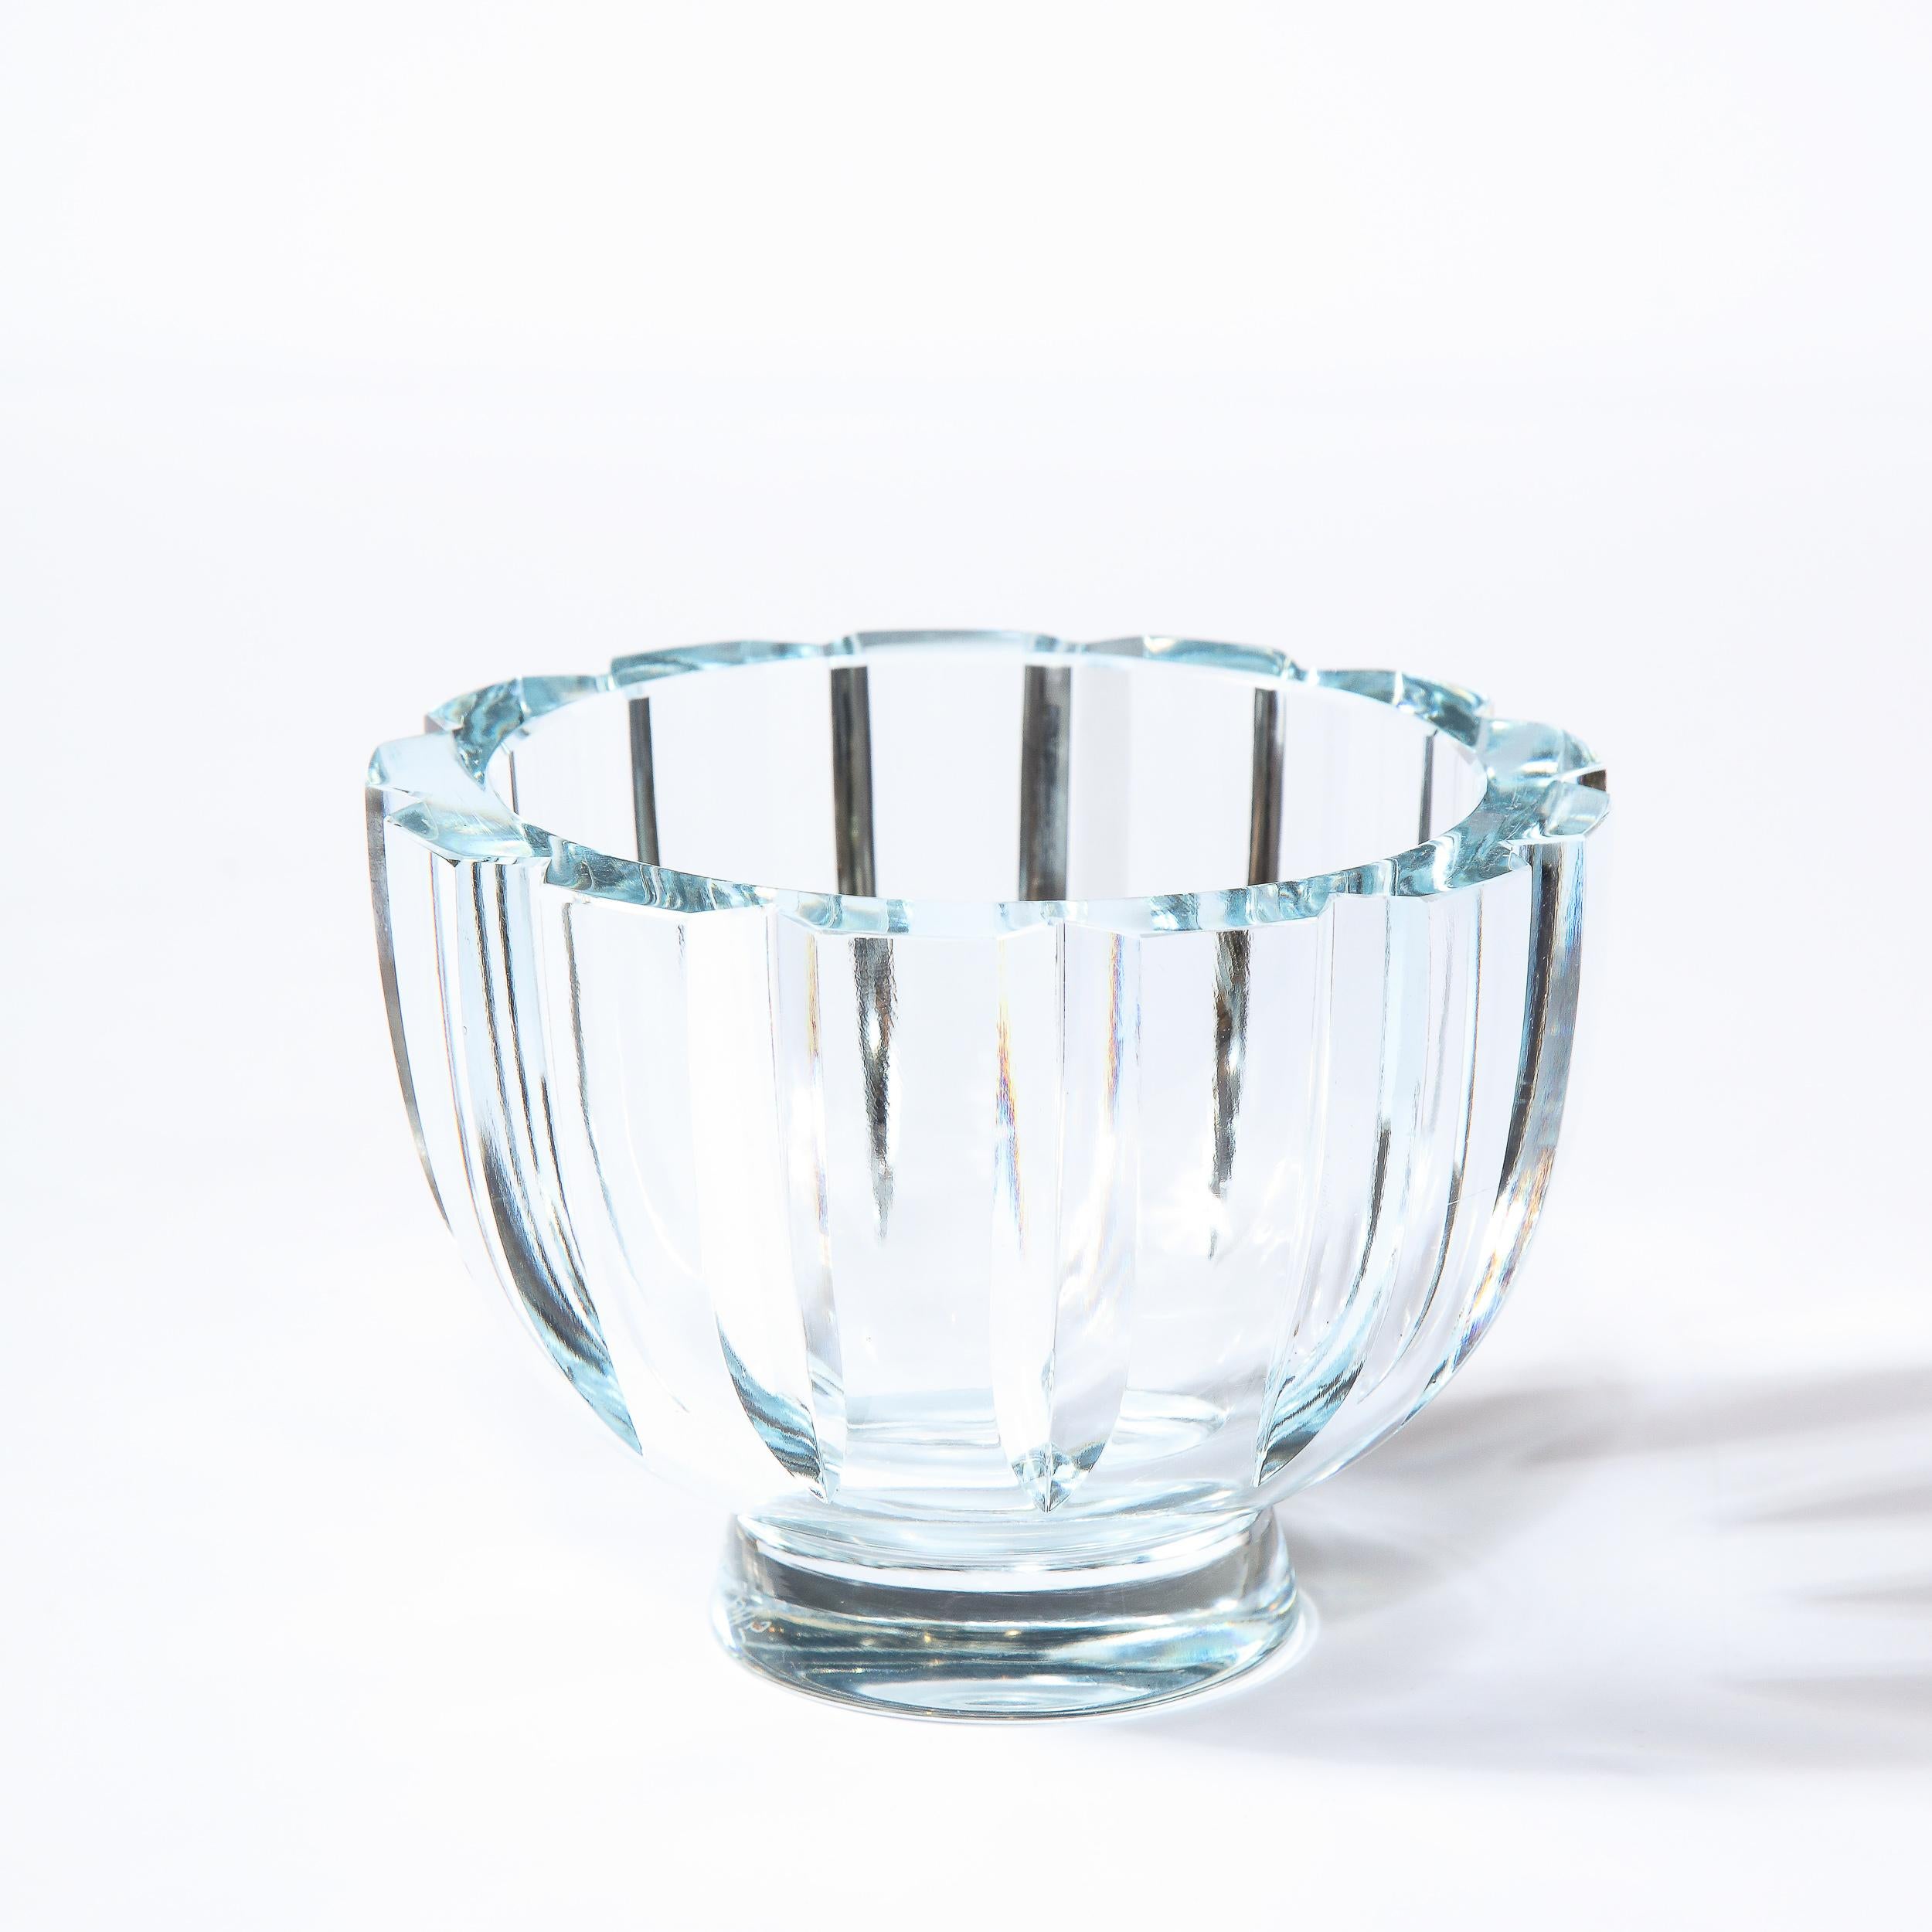 This stunning Mid-Century Modern bowl was realized in Sweden circa 1950. It features a cylindrical form that tapers to its circular base with deep triangular notched channel faceting running along the perimeter- all in a subtle light blue hue. With